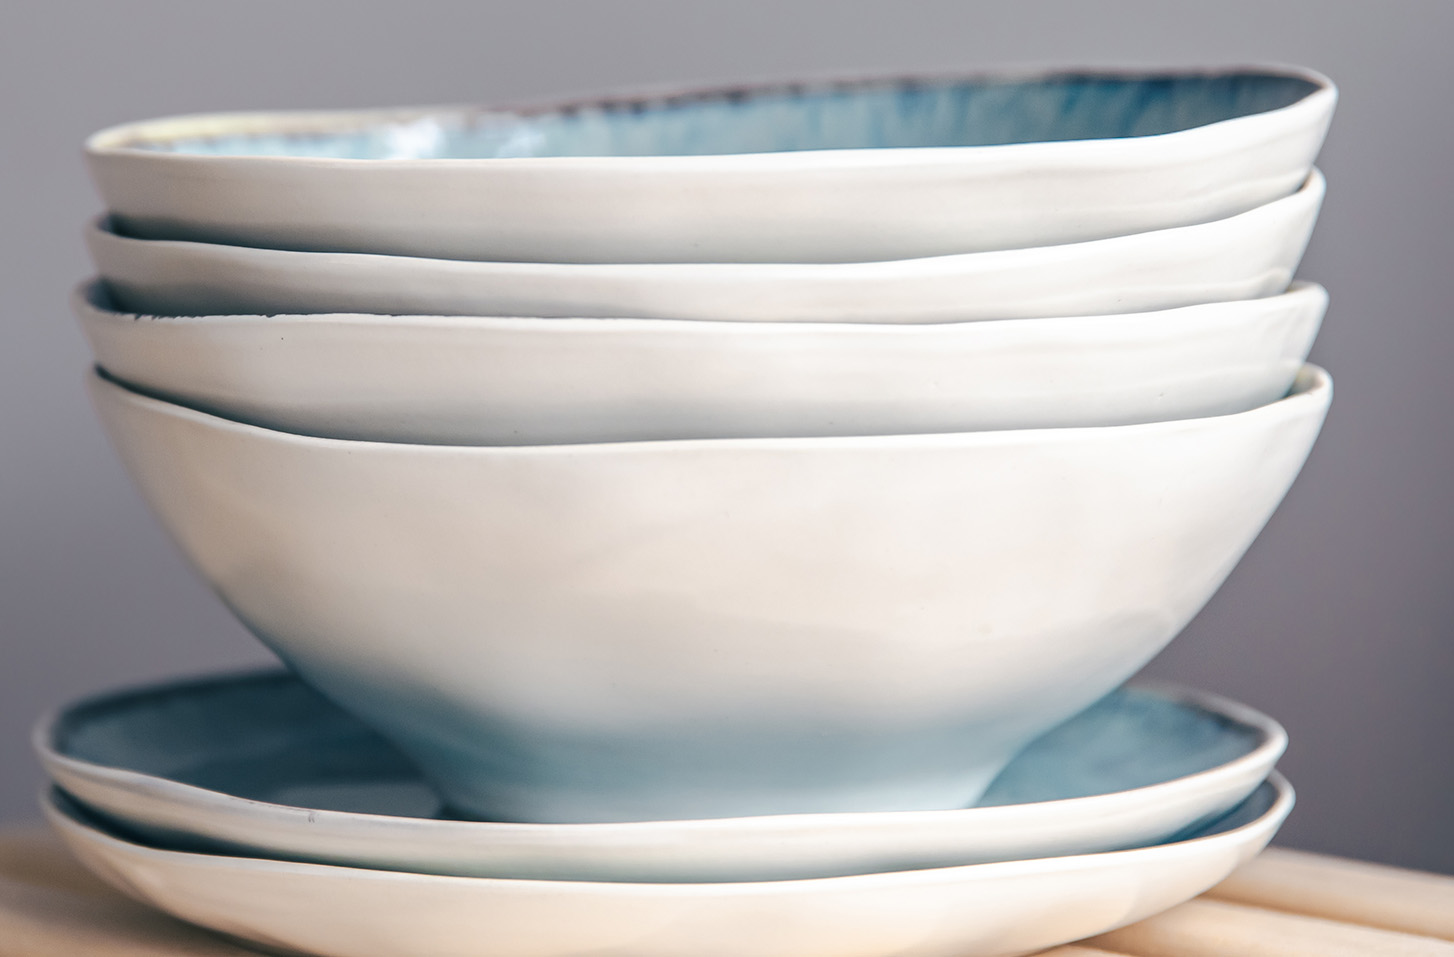 A set of beautiful plates in pastel colors on a gray background, copy space.